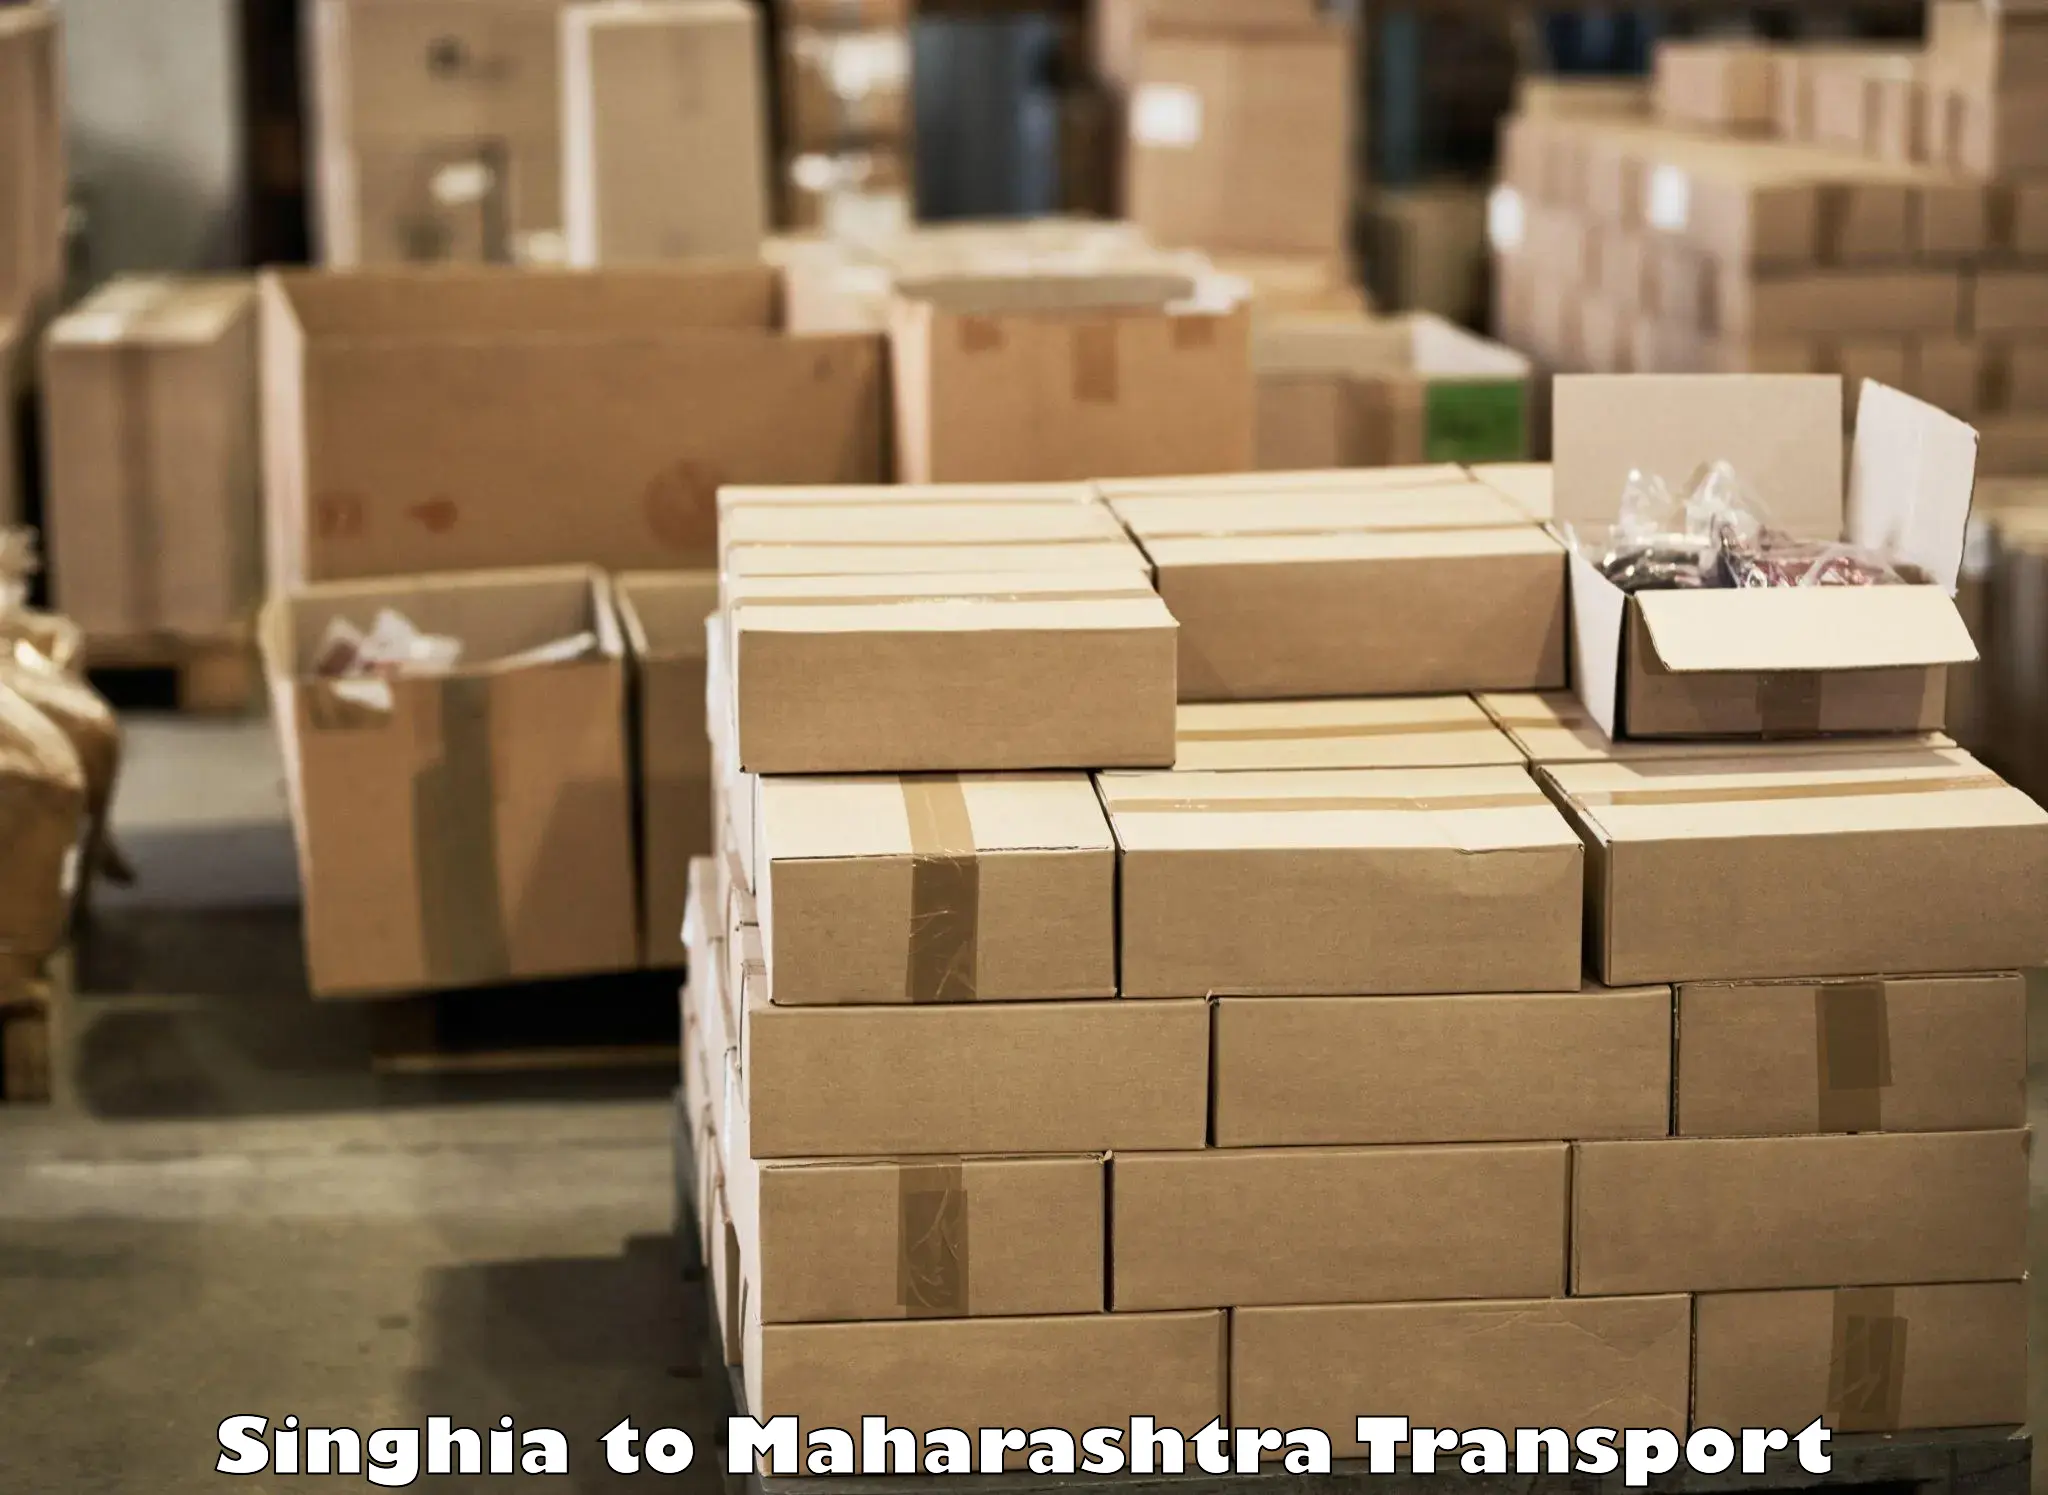 Truck transport companies in India Singhia to Thane